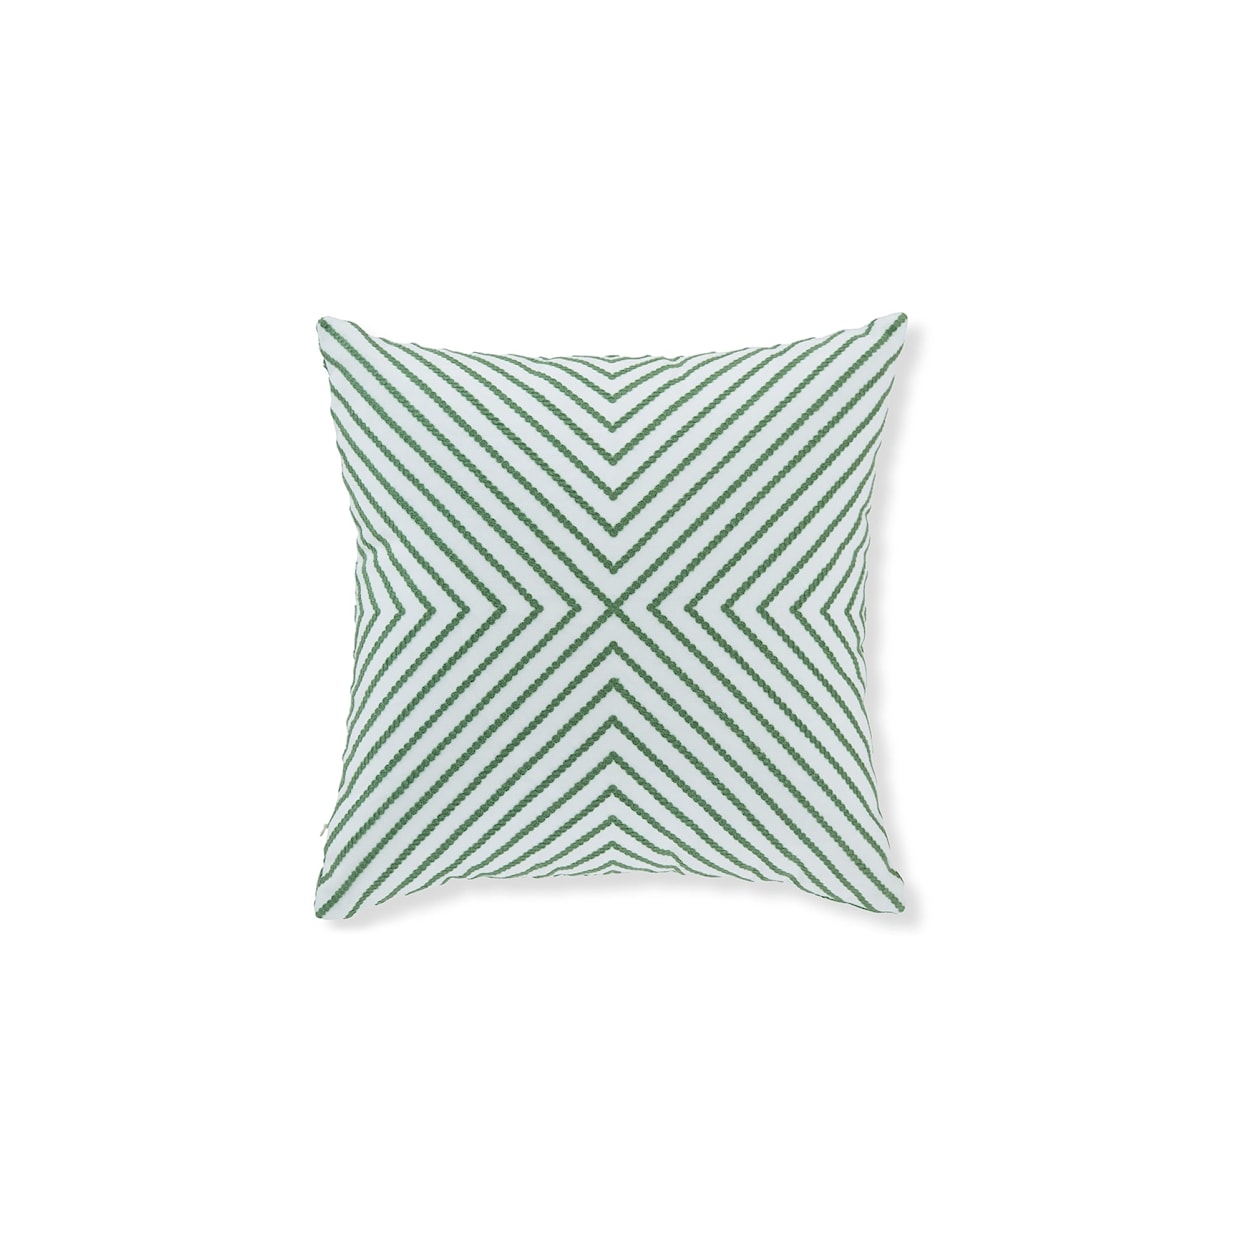 Signature Design by Ashley Bellvale Pillow (Set of 4)